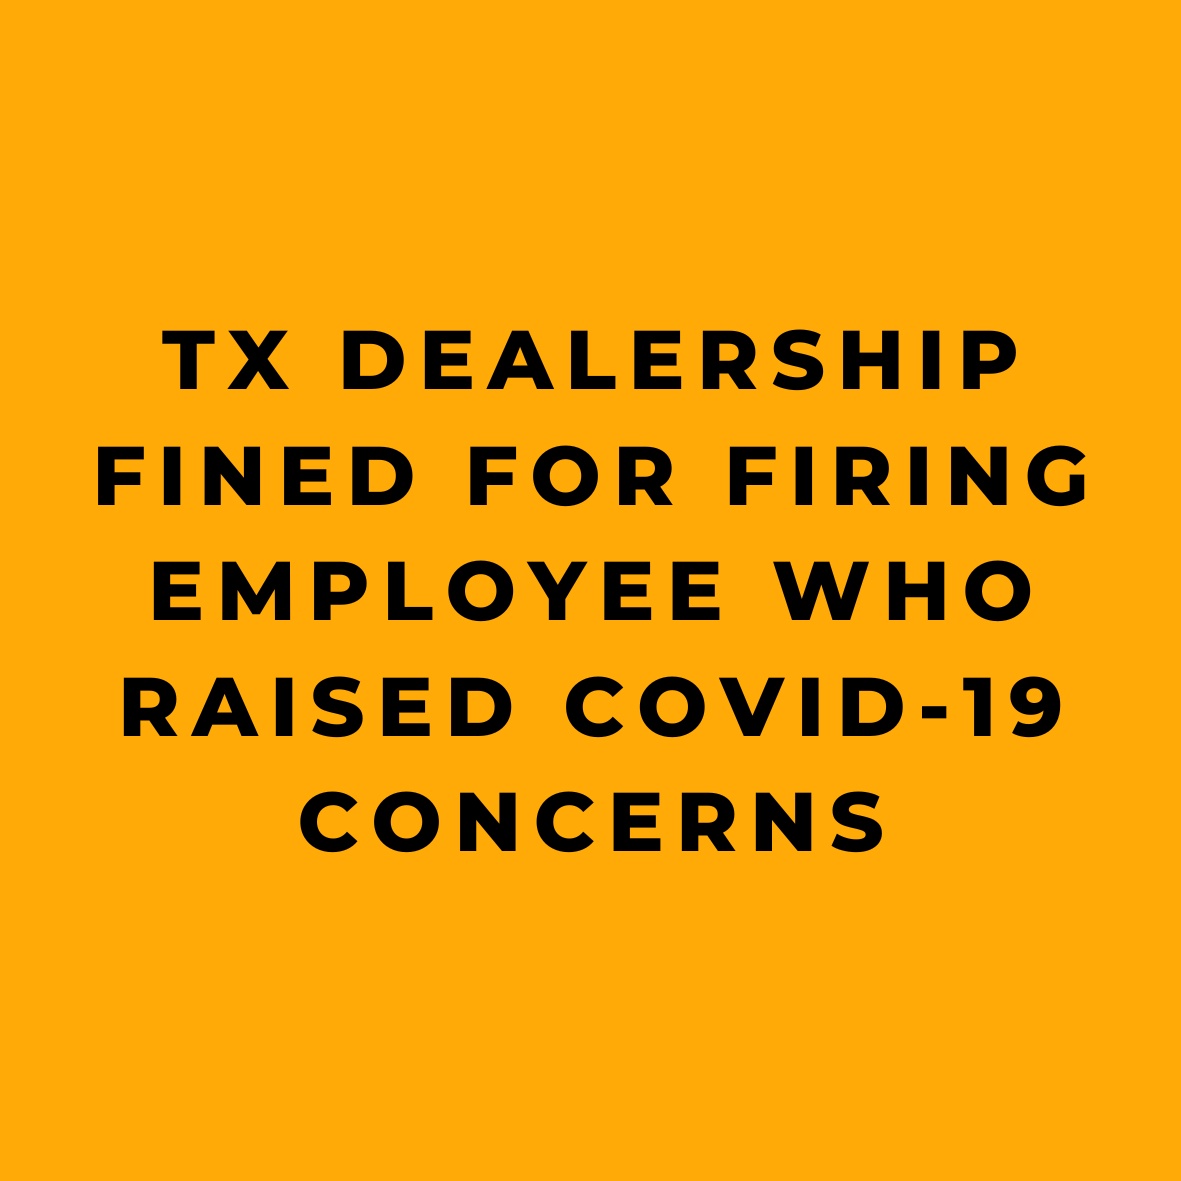 TX Dealership Fined for Firing Employee Who Raised COVID-19 Concerns